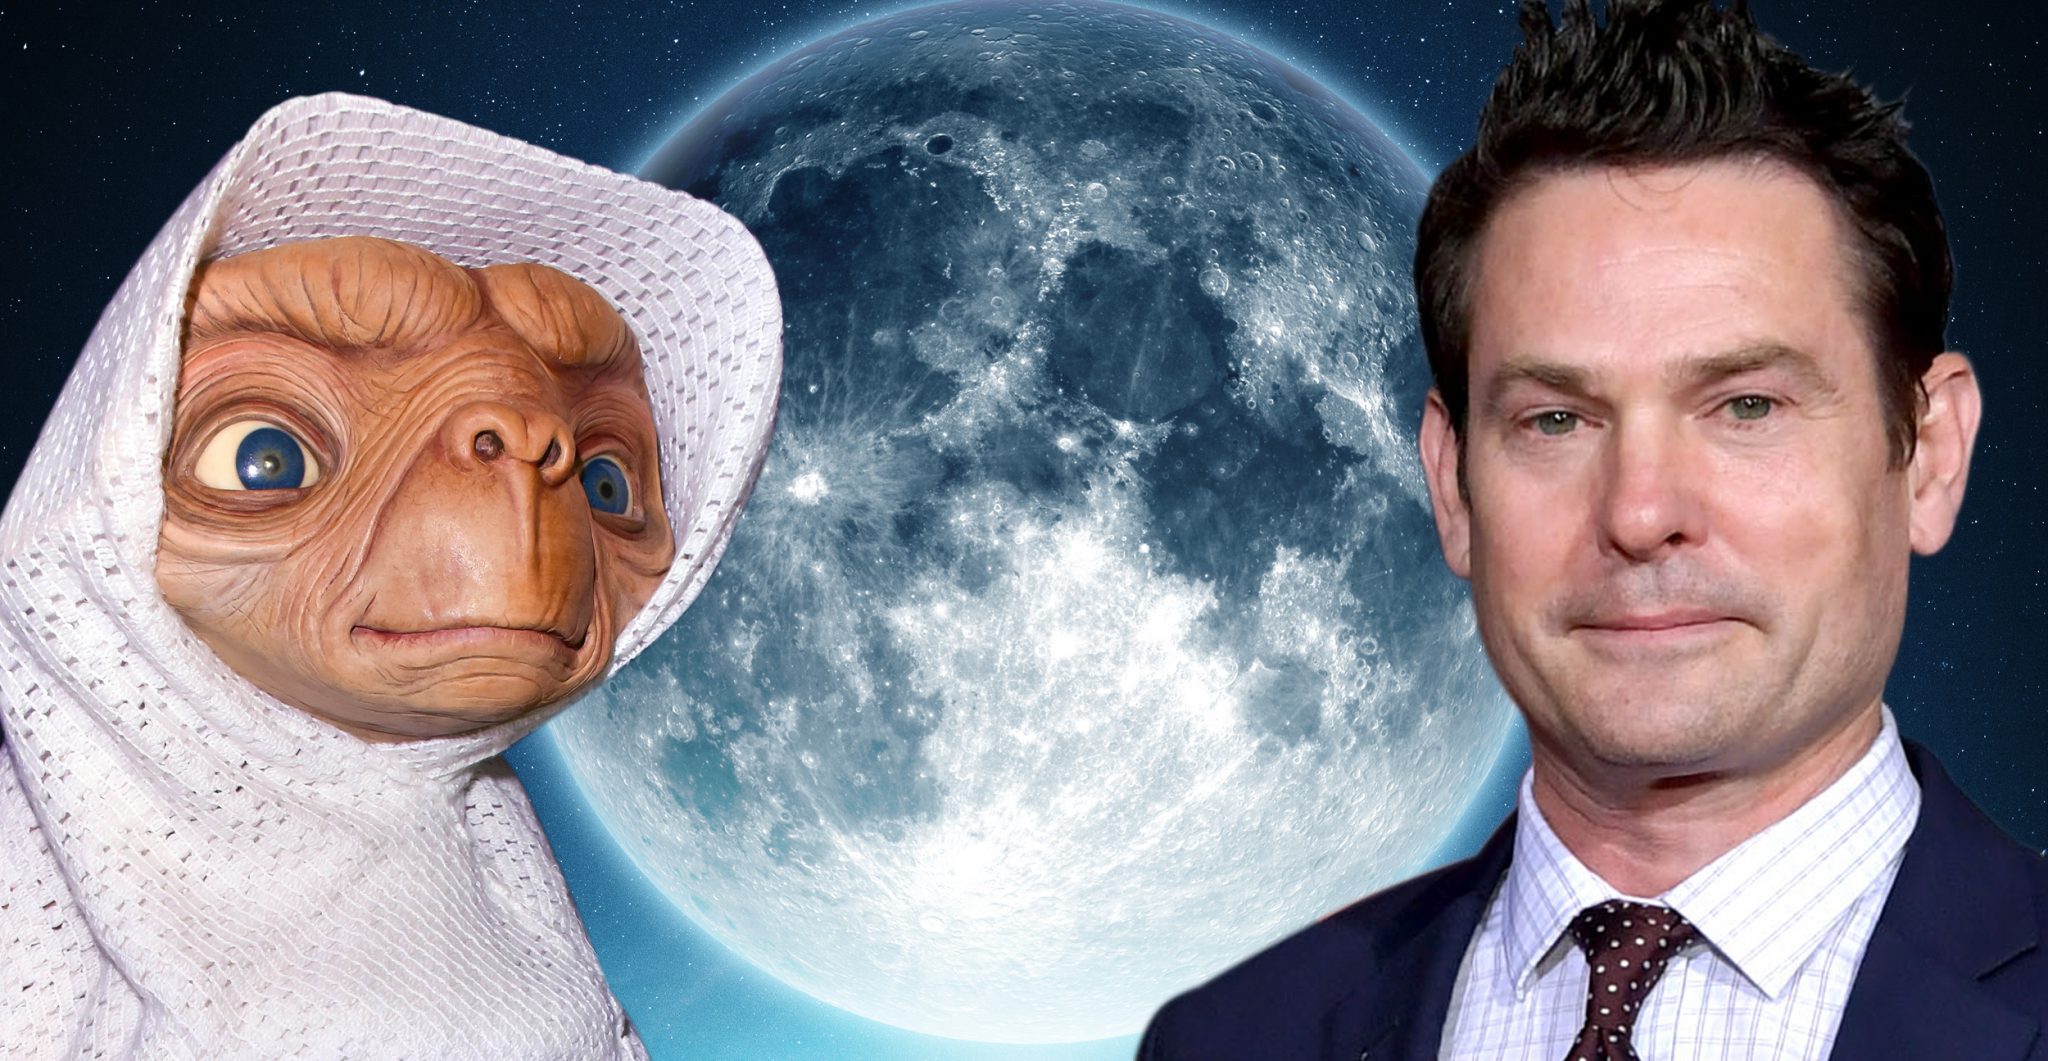 E.T. and Elliott Reunited for the Holidays in Heartwarming Short Film